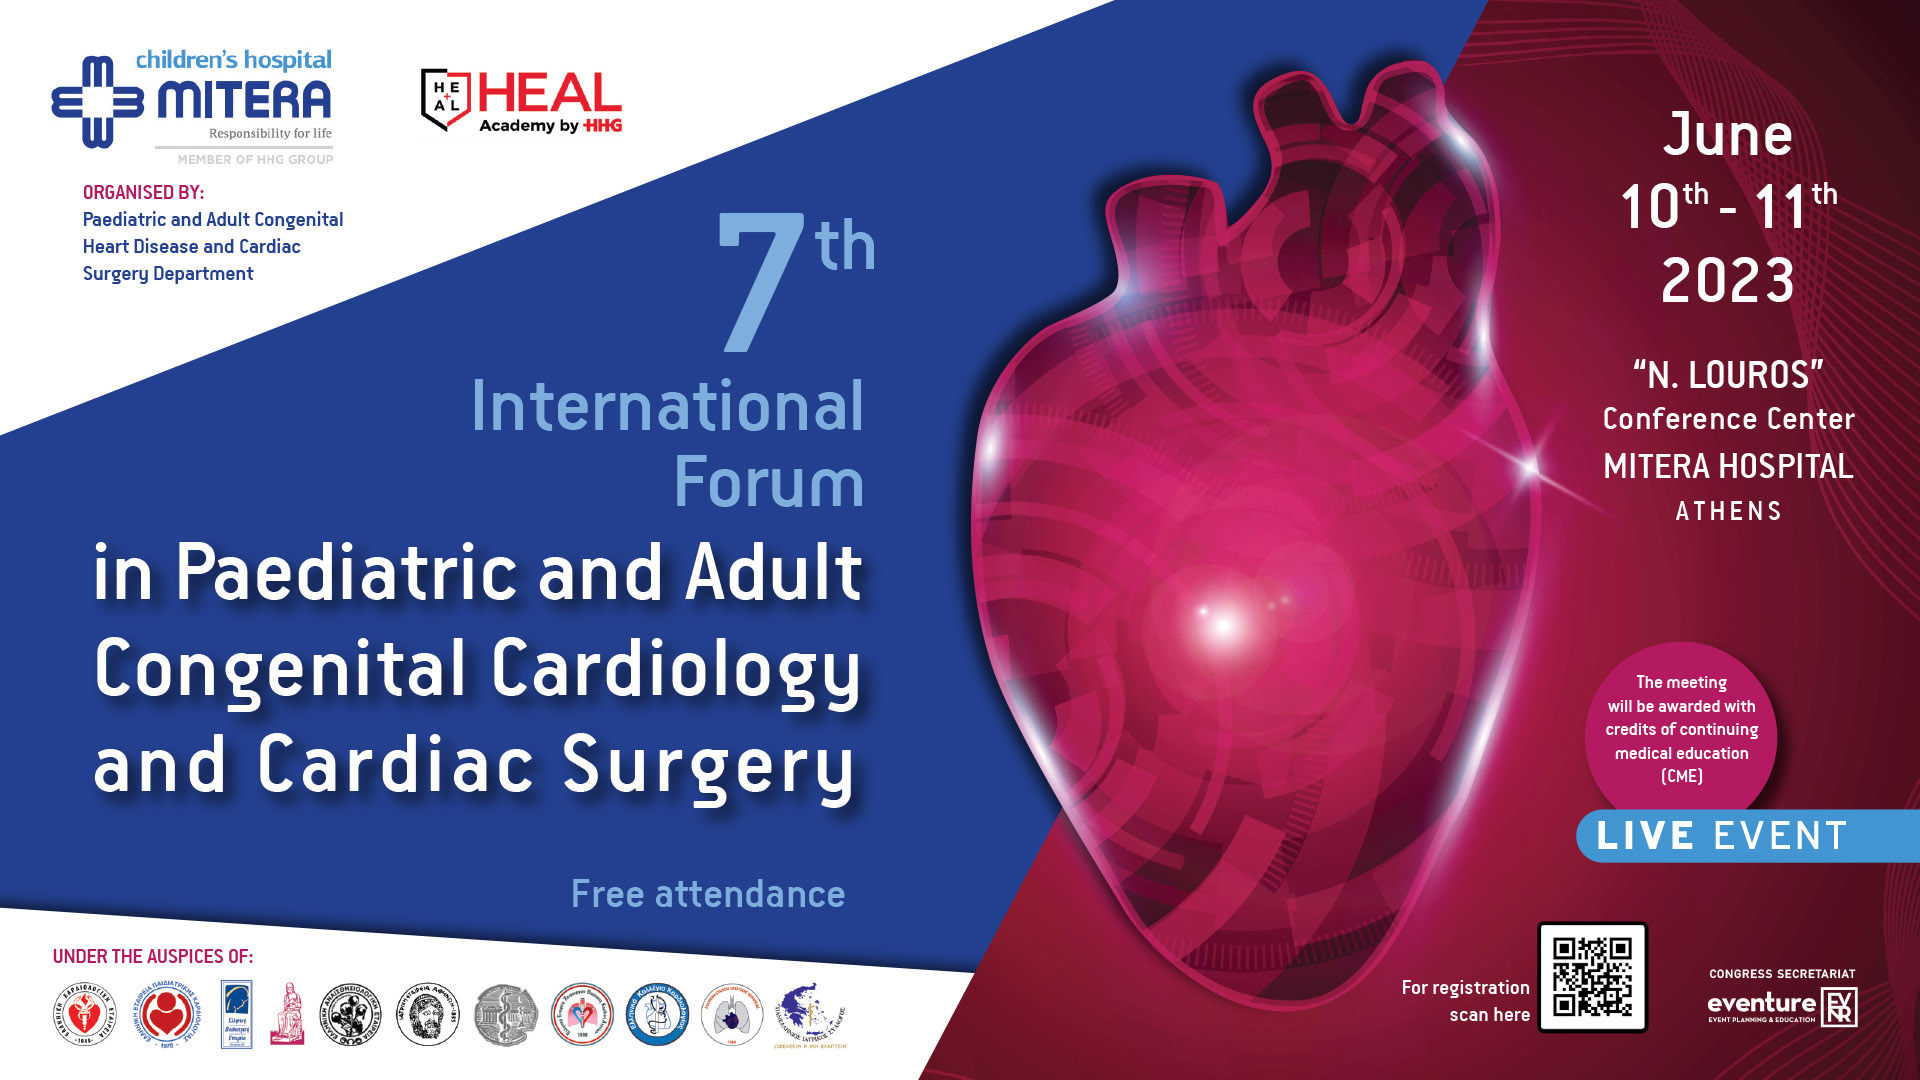 7th International Forum in Paediatric and Adult Congenital Cardiology and Cardiac Surgery